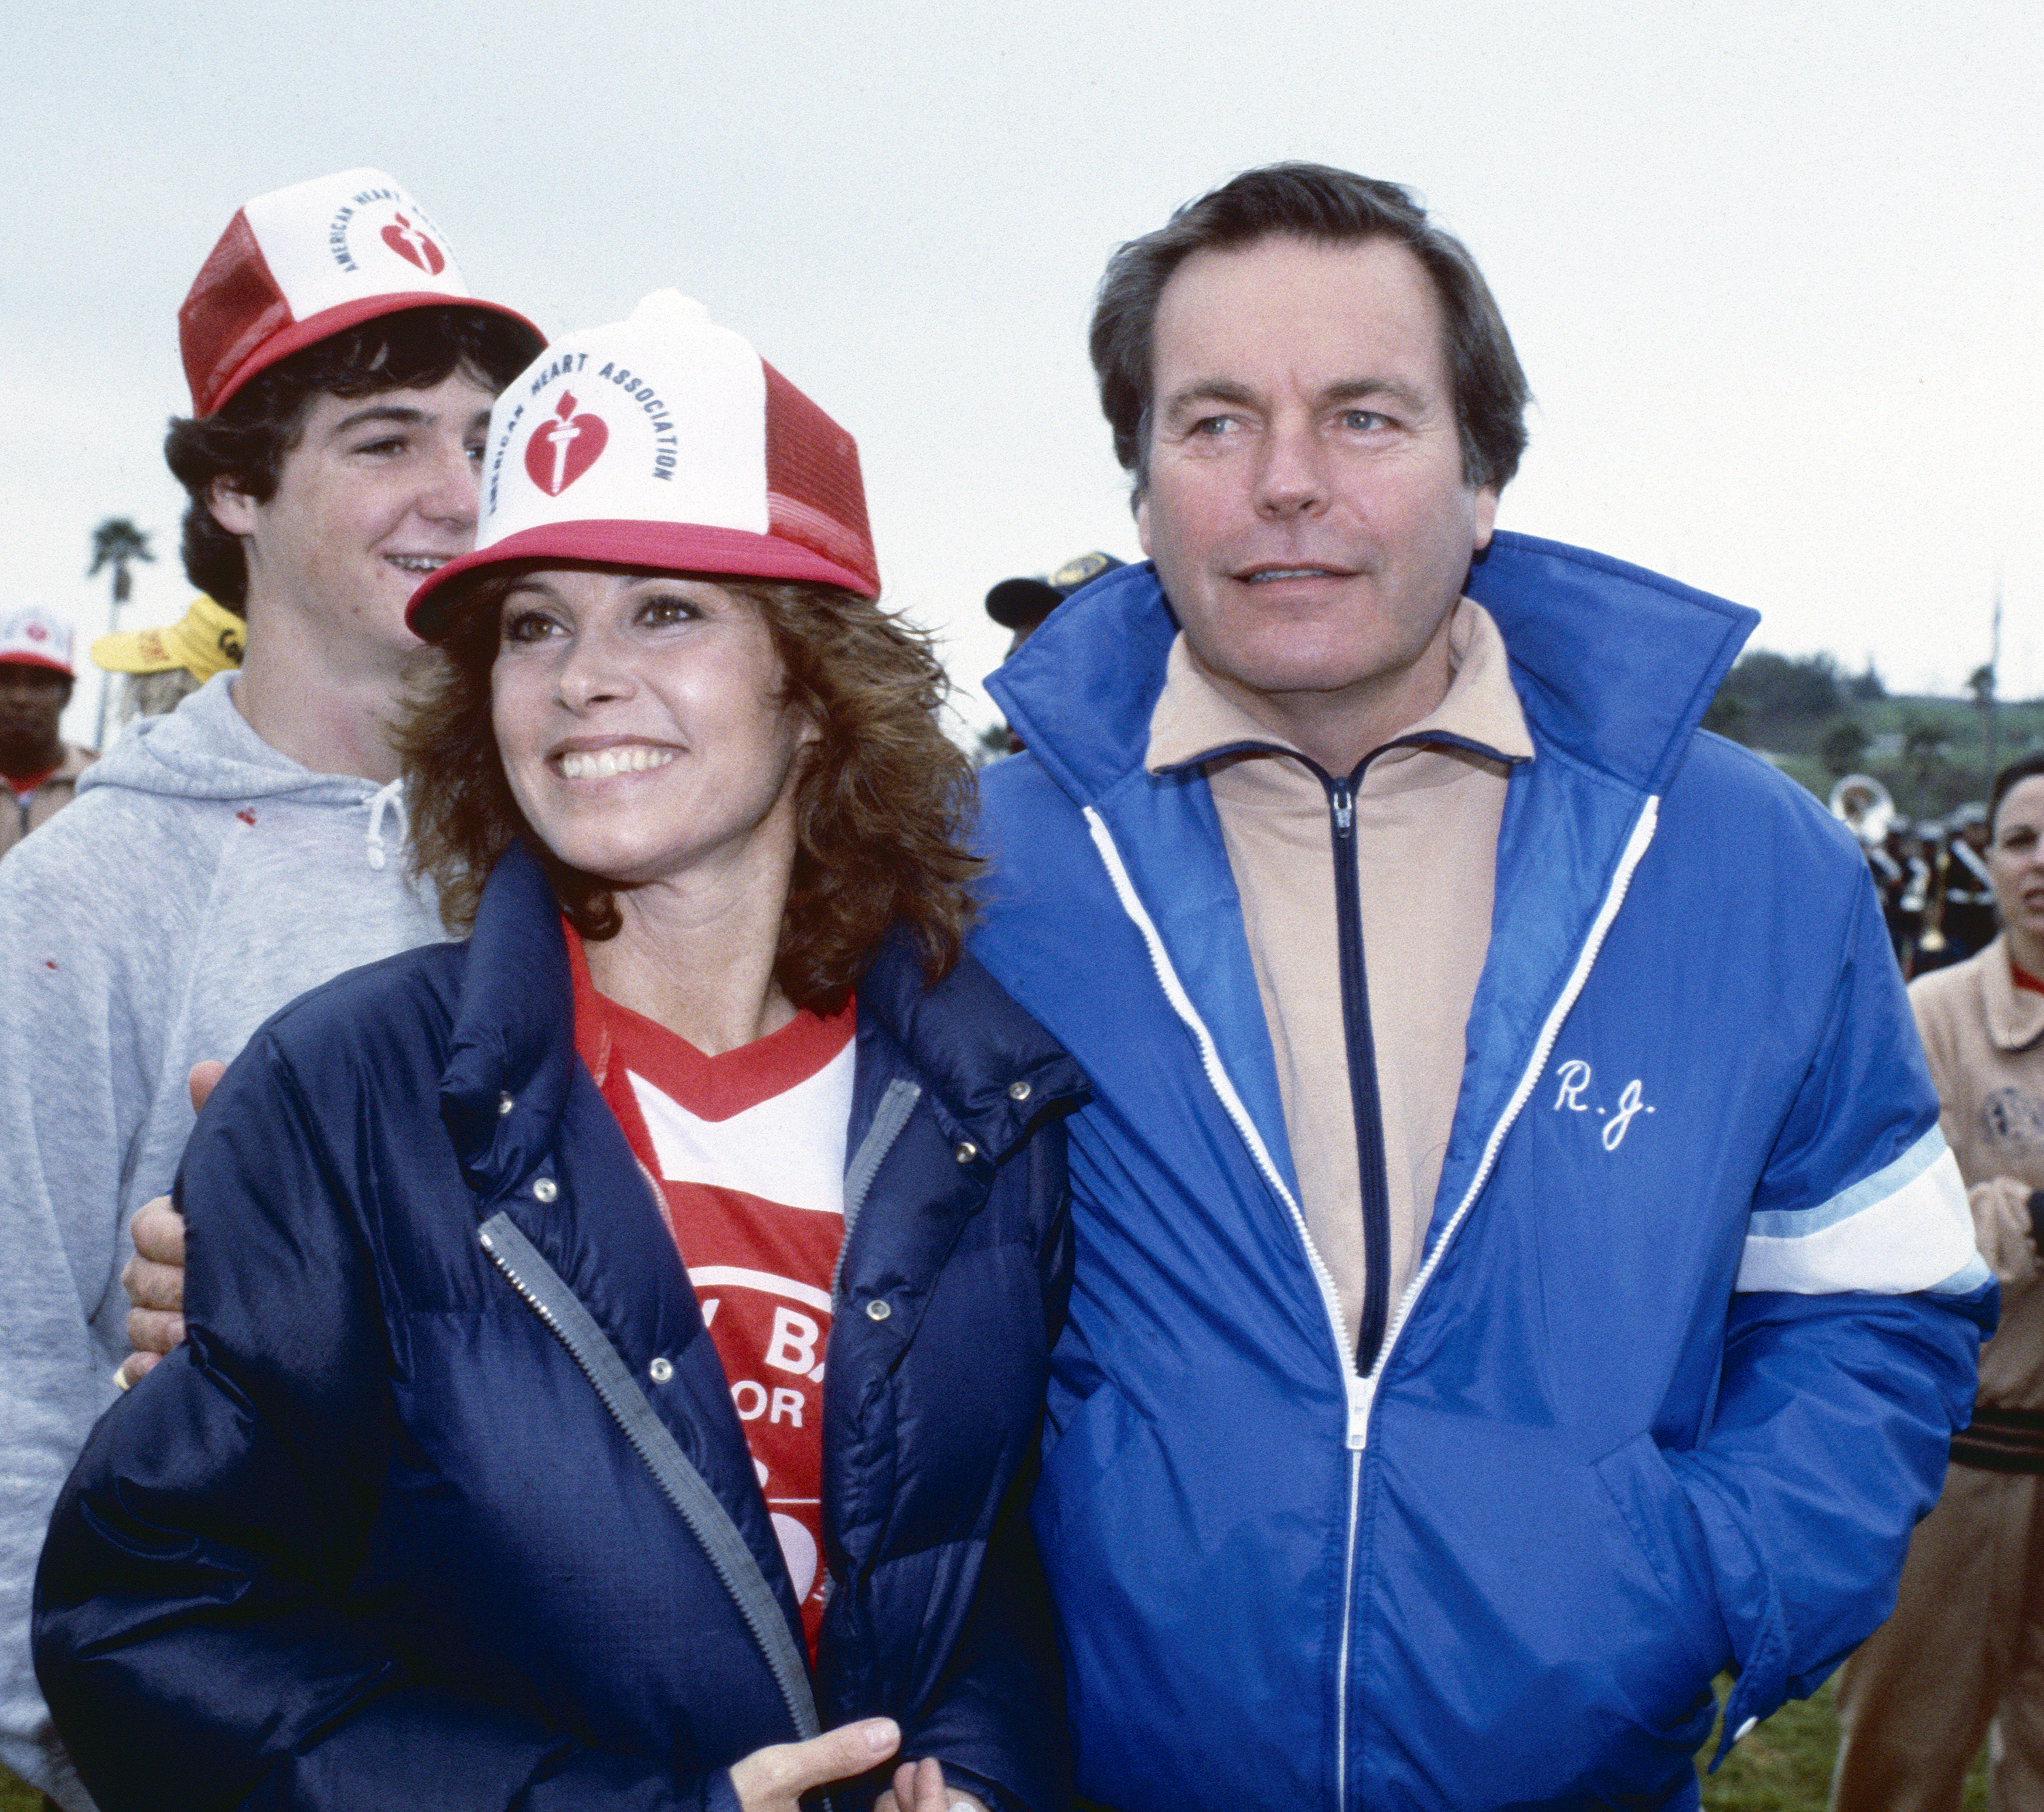 American actors Stefanie Powers and Robert Wagner, who play the titular characters in the television show 'Hart to Hart,' as they attend a celebrity softball game to benefit the American Heart Association, Malibu, California, February 6, 1983. | Source: Getty Images